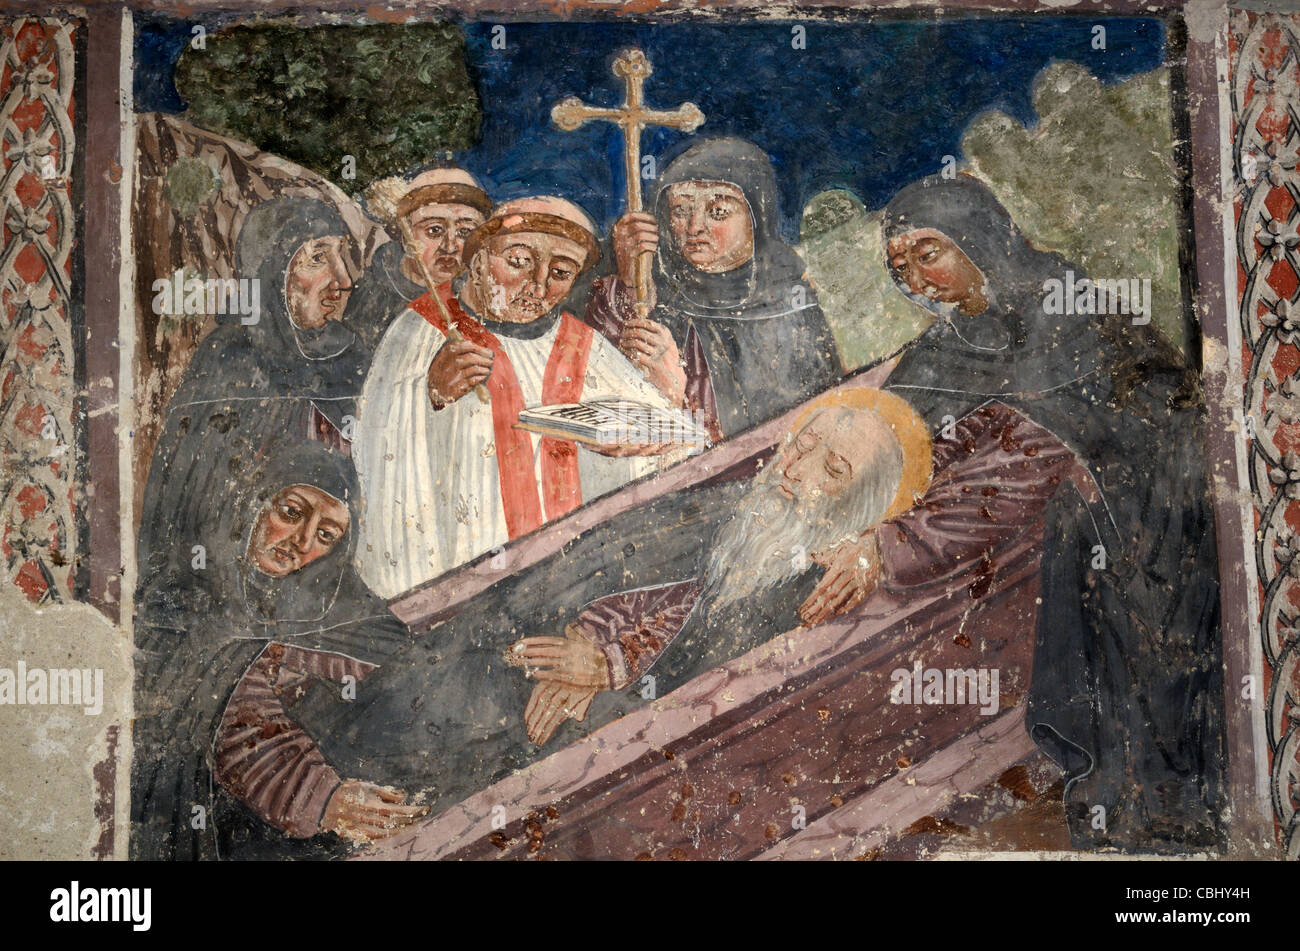 Death of Saint Anthony the Hermit (c468-c520), Fresco or Wall Painting, St Anthony's Chapel, Clans, Tinée Valley, Alpes-Maritimes, France Stock Photo